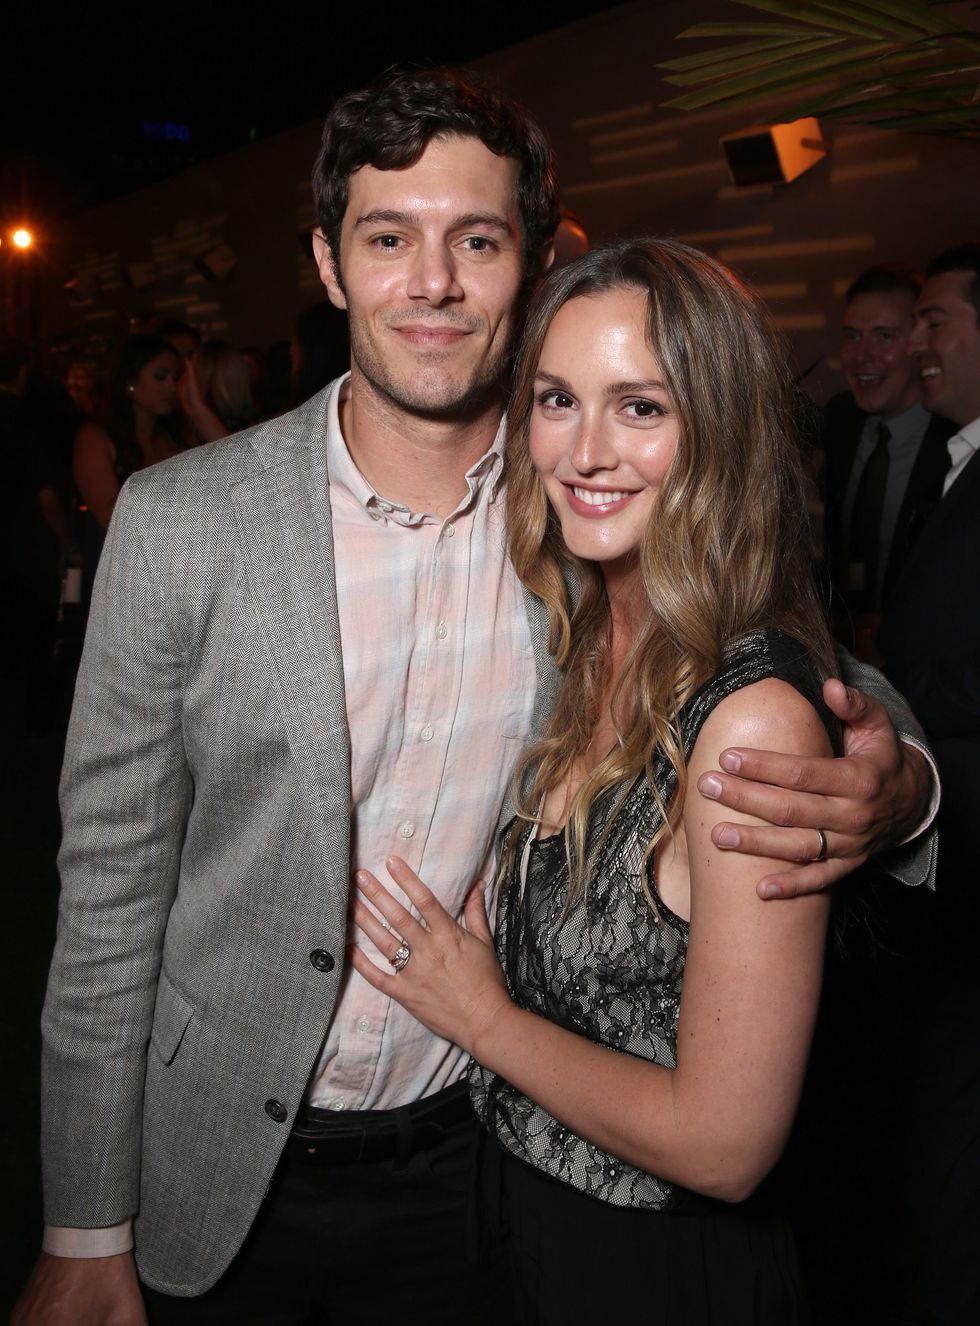 los angeles, ca august 23 adam brody and leighton meester attend the after party for the premiere pf crackles startup on august 23, 2016 in los angeles, california photo by todd williamsongetty images